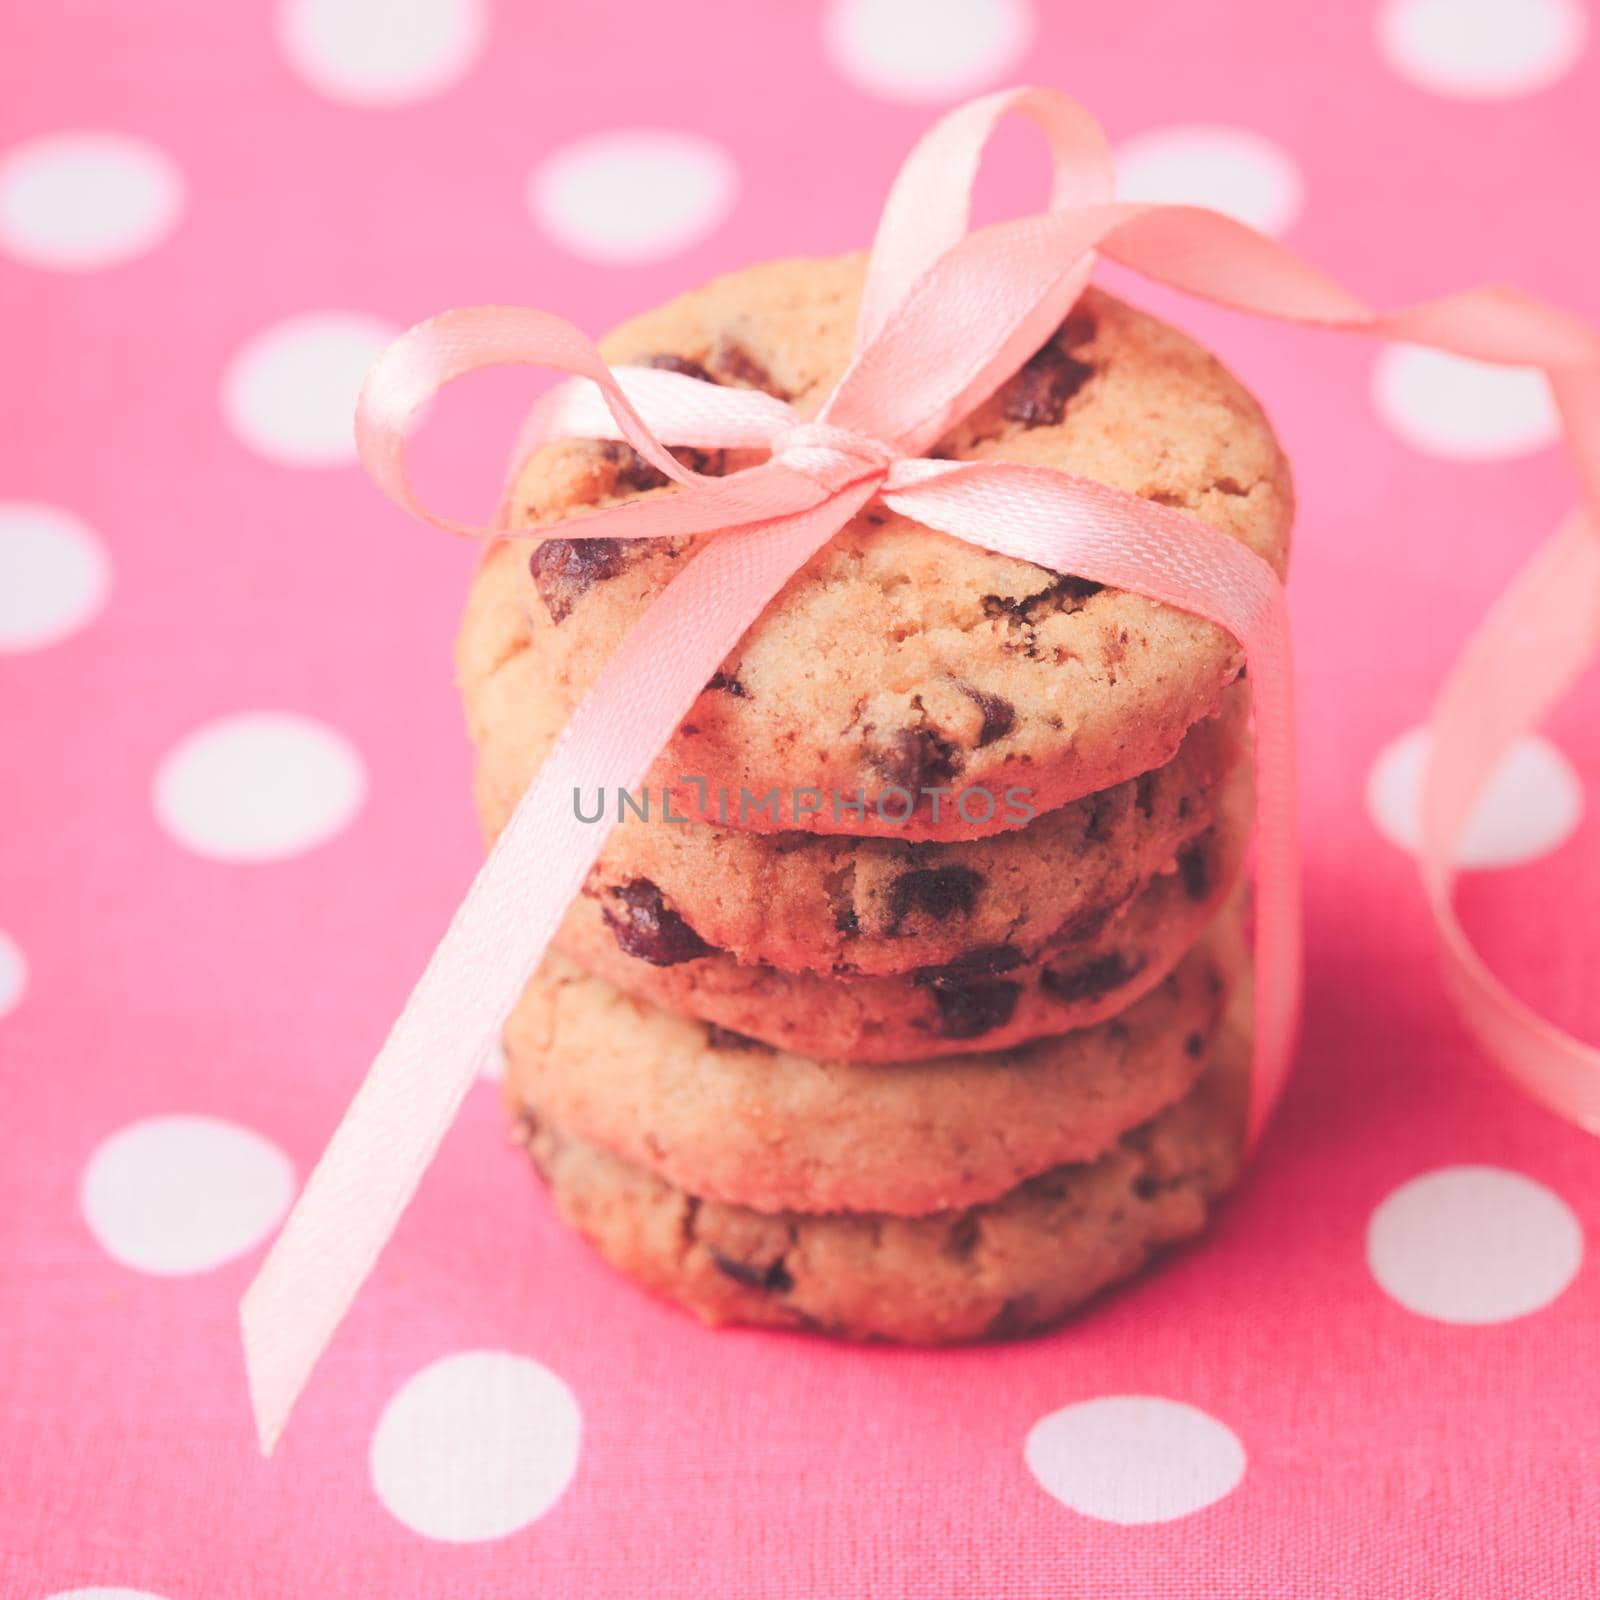 Cookies with ribbon. Holiday present on pink polka dot textile